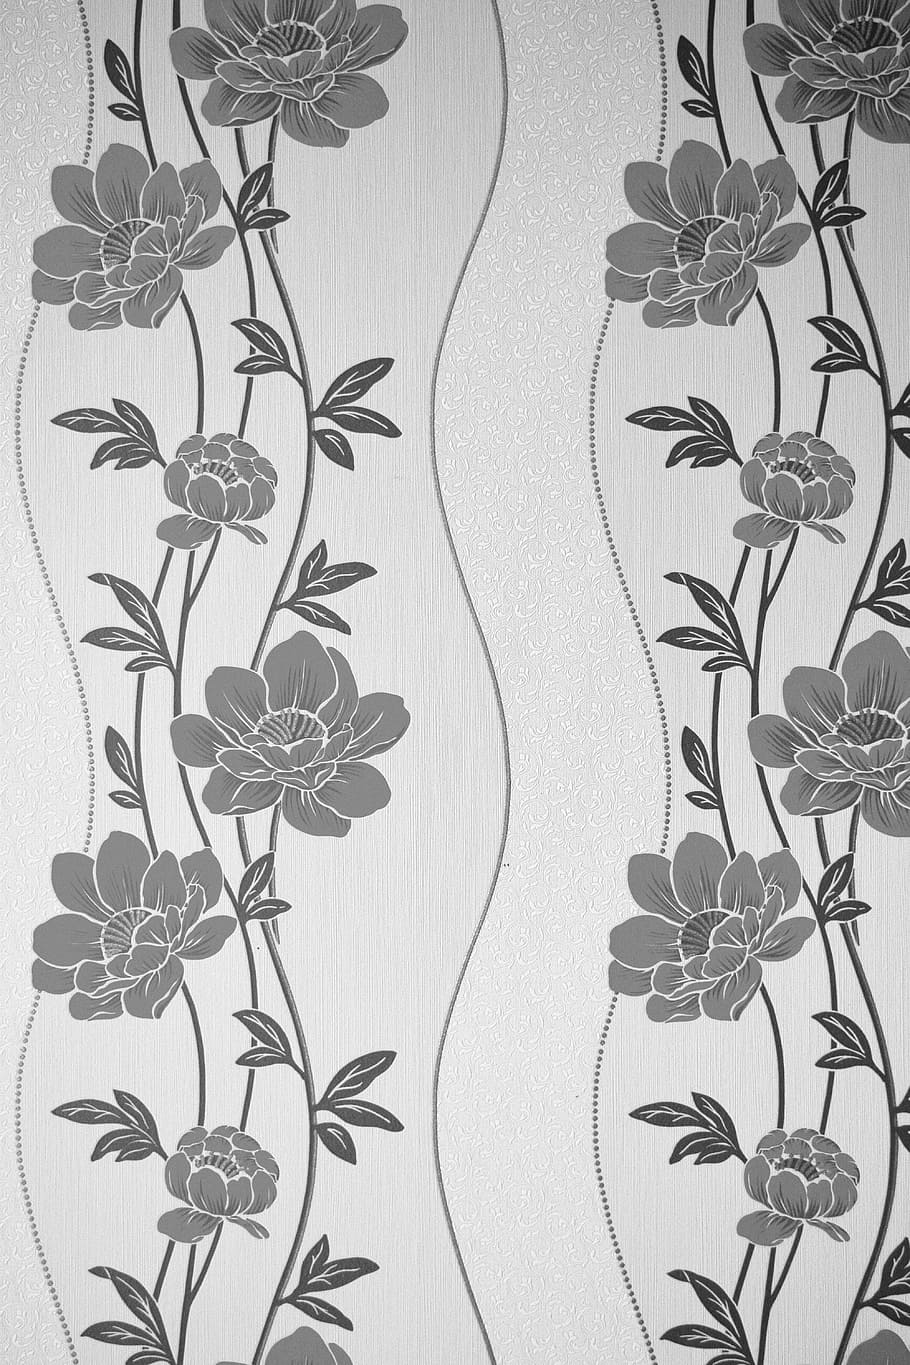 Free download | HD wallpaper: gray and white floral print wall decor